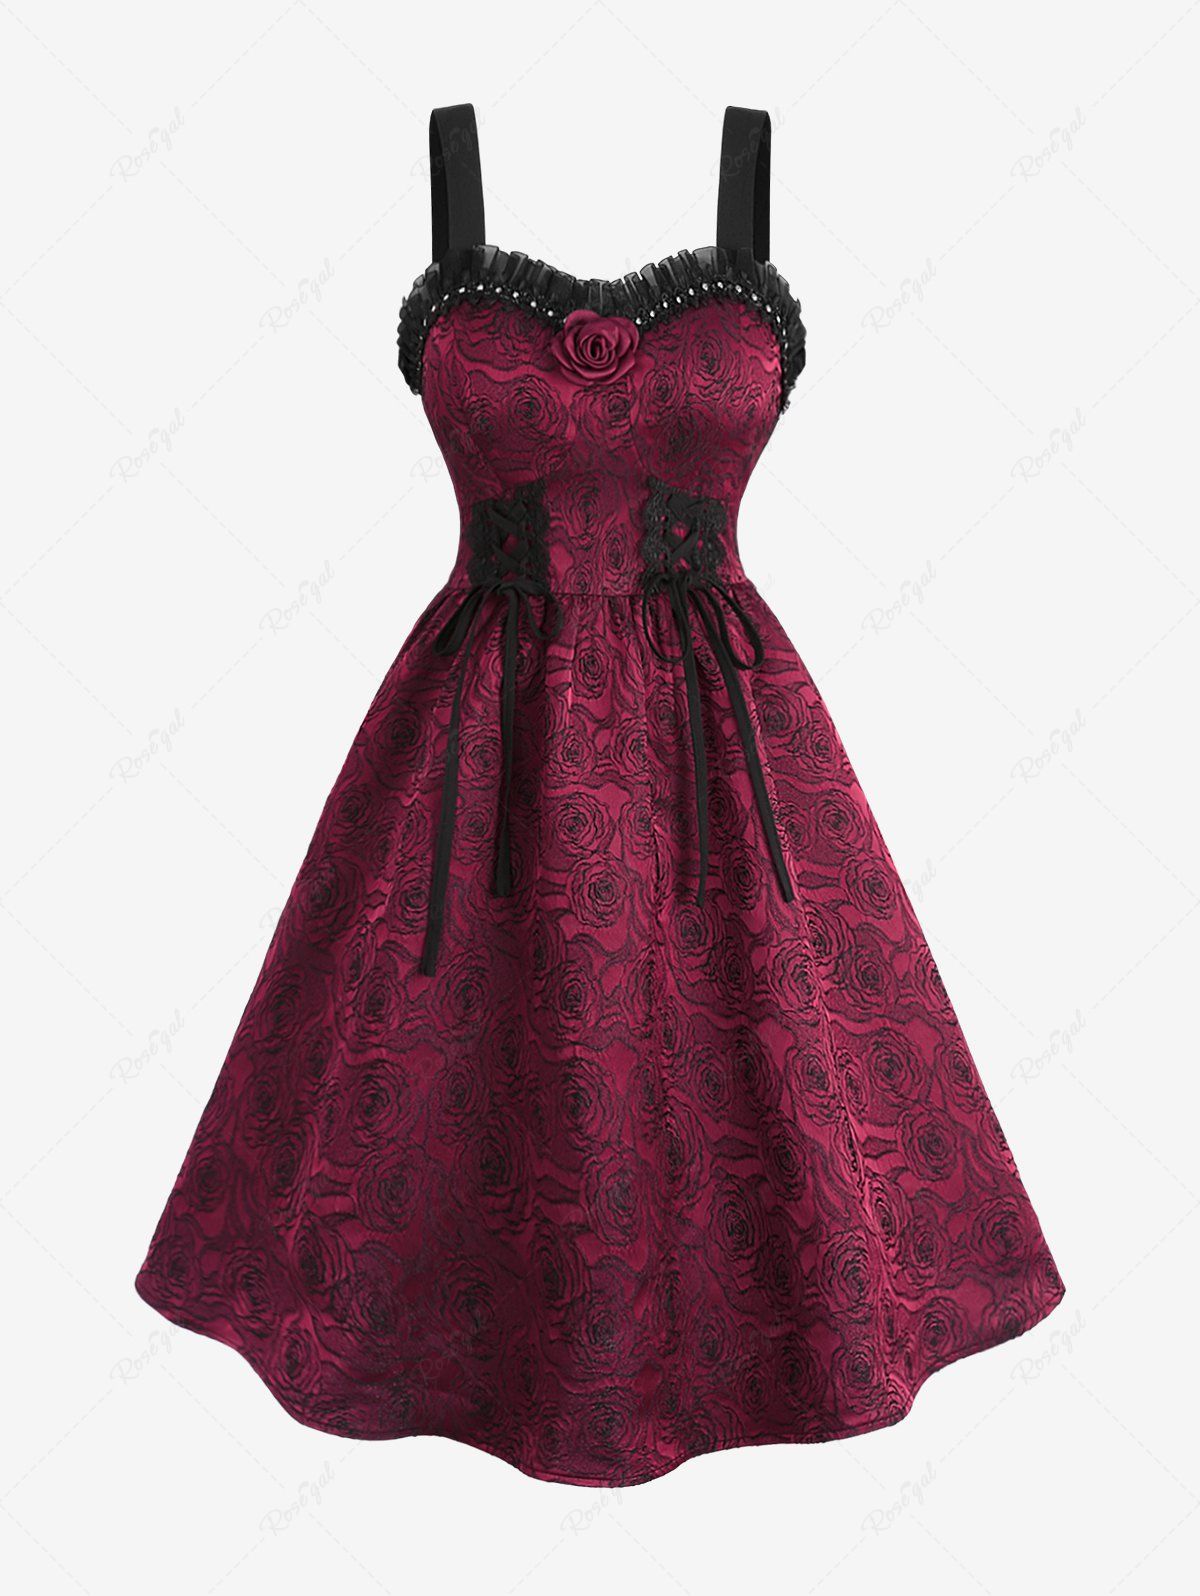 Fashion Plus Size Lace-up Flower Embroidered Jacquard Rose Pin Decorated Rivet Ruffles Lace Trim Valentines Tank Dress  